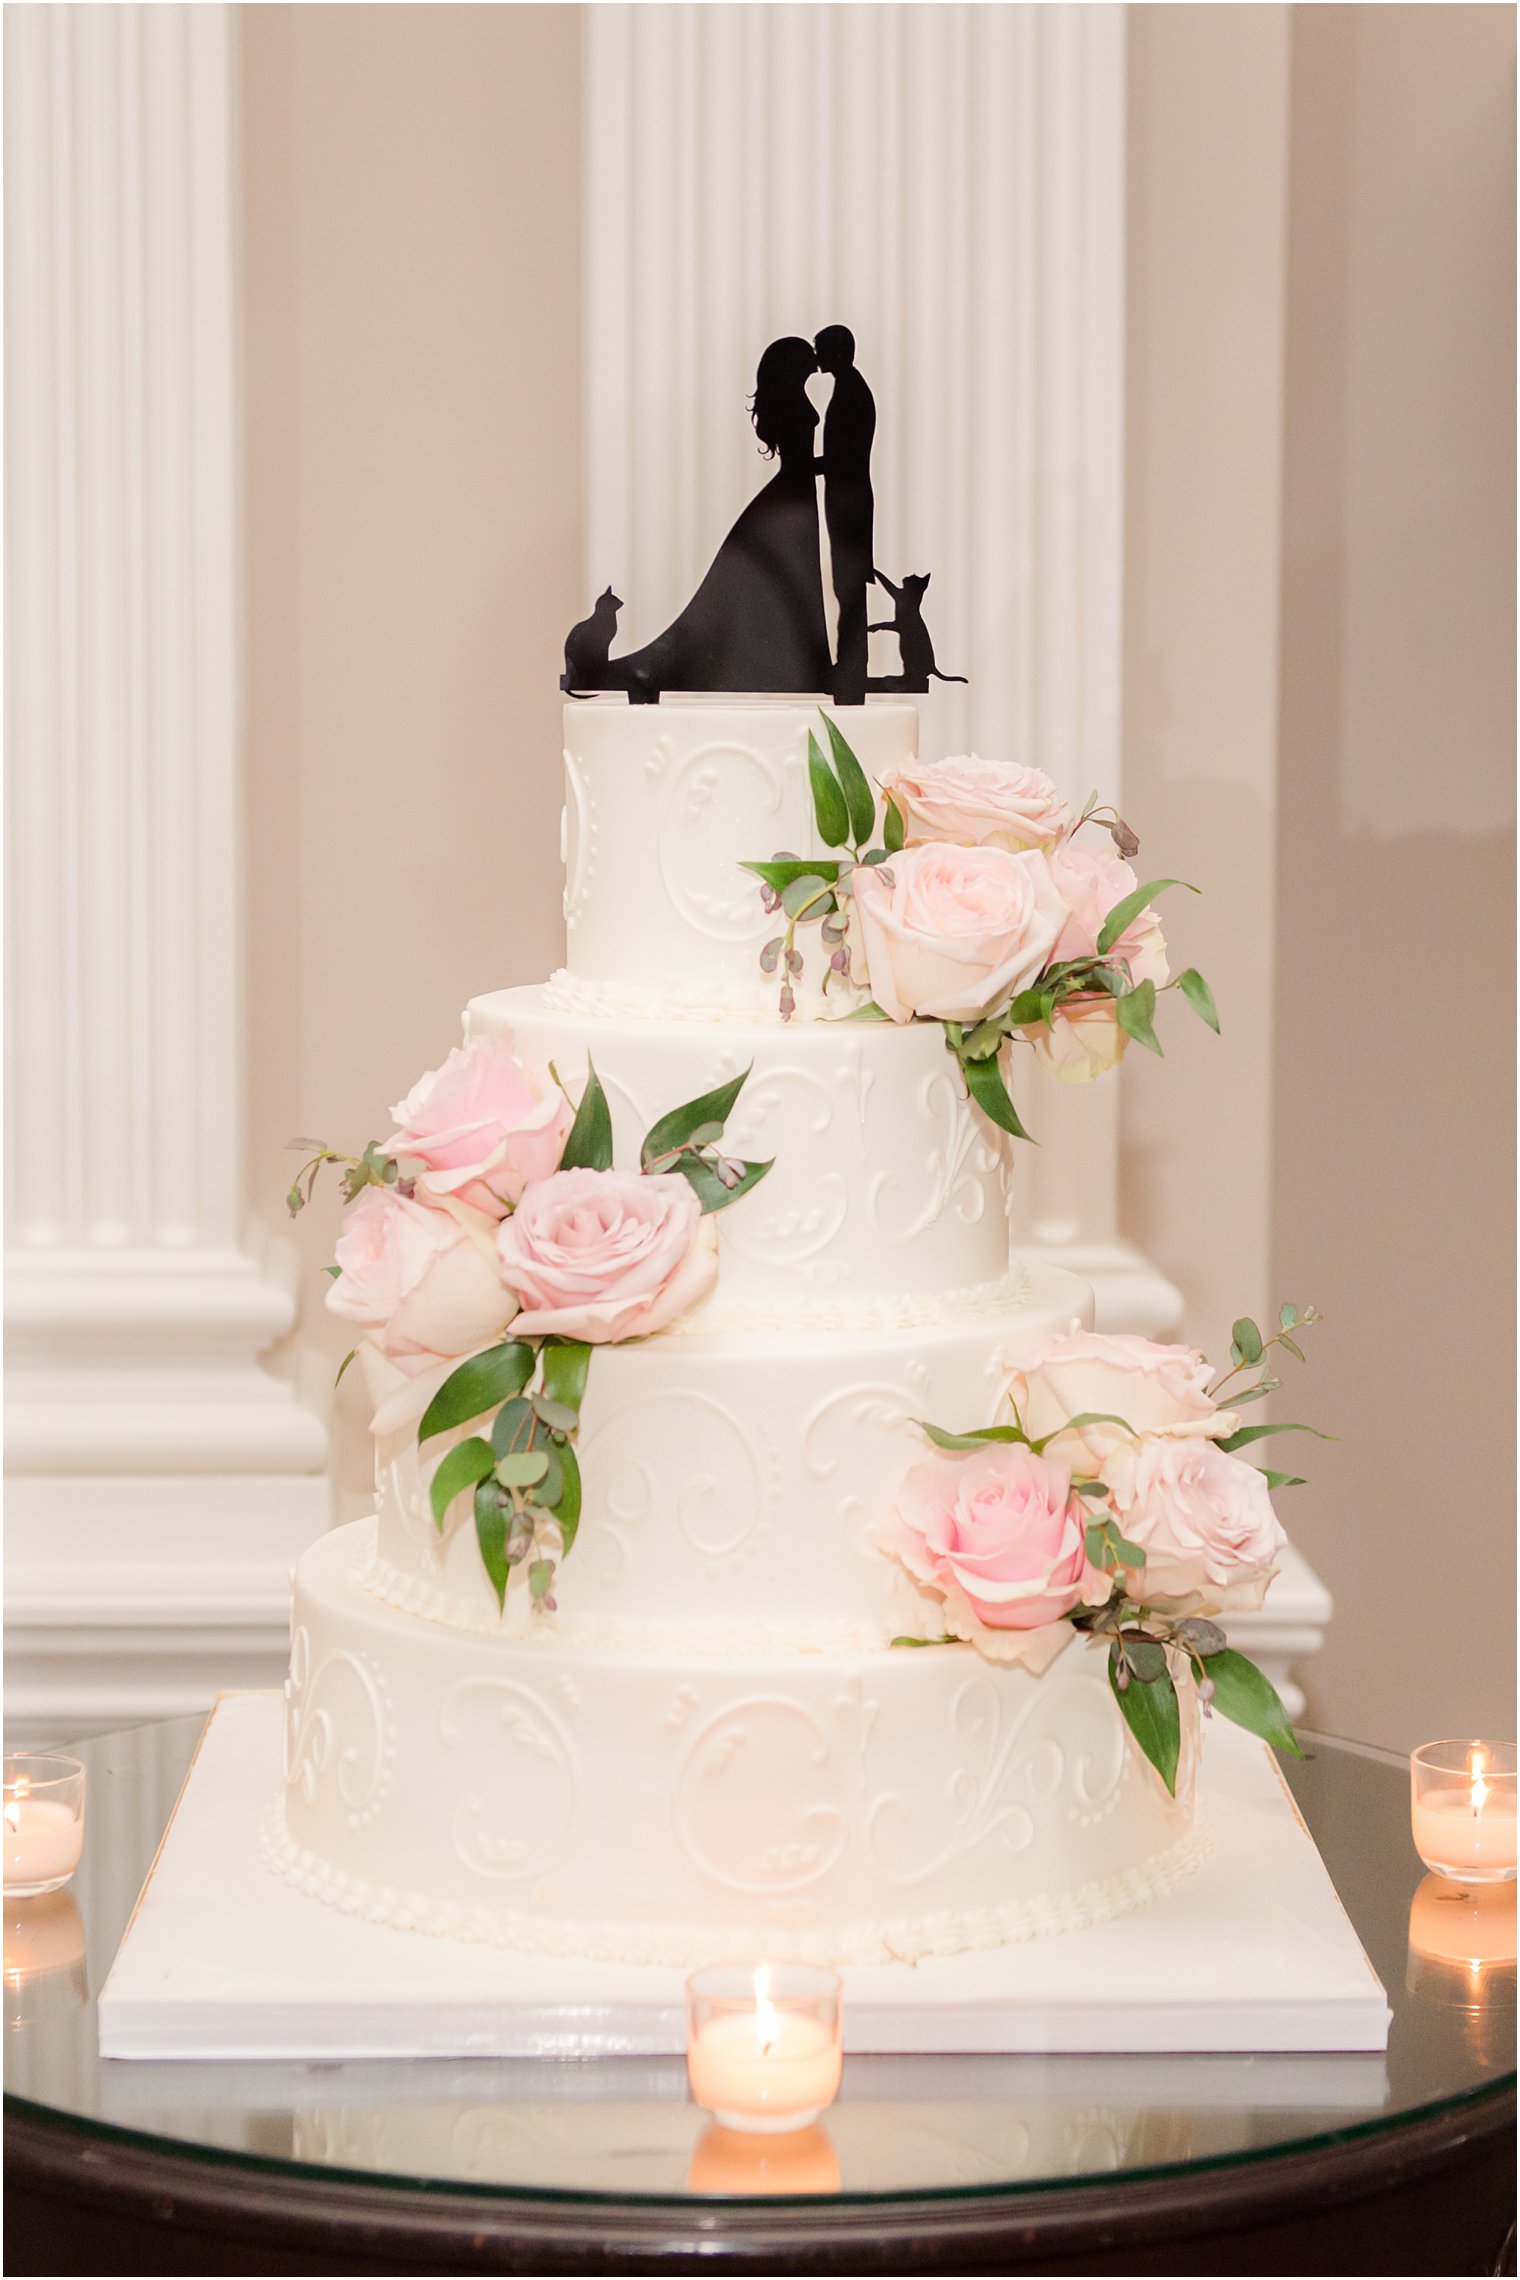 tiered wedding cake with silhouette cake topper with two cats